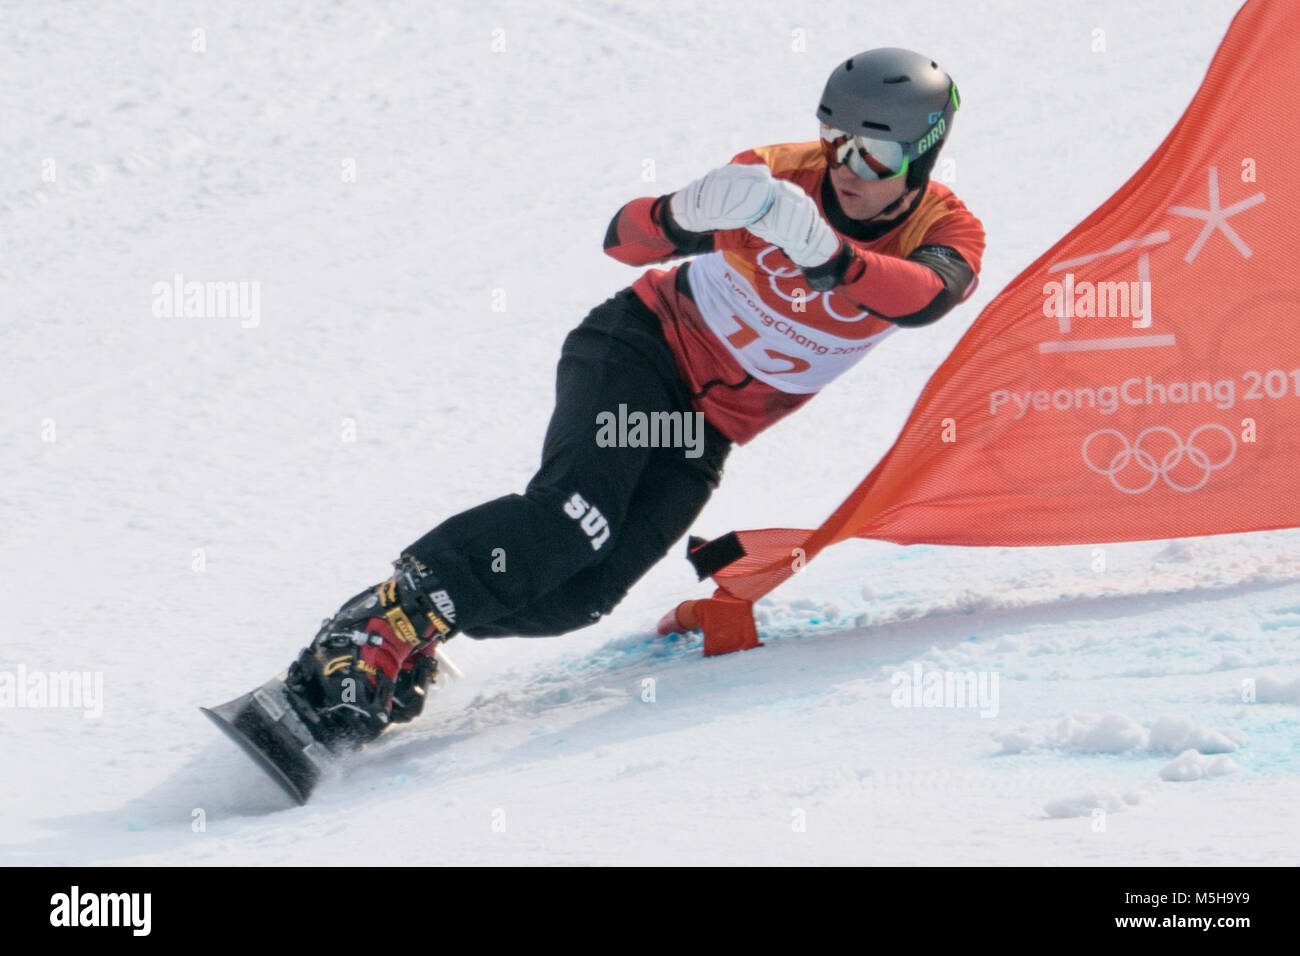 Pyeongchang, South Korea. 24th Feb, 2018. Nevin Galmarini of Switzerland competes during men's parallel giant slalom of snowboard at the 2018 PyeongChang Winter Olympic Games at Phoenix Snow Park, PyeongChang, South Korea, Feb. 24, 2018. Nevin Galmarini won the gold medal in the big final. Credit: Wu Zhuang/Xinhua/Alamy Live News Credit: Xinhua/Alamy Live News Stock Photo